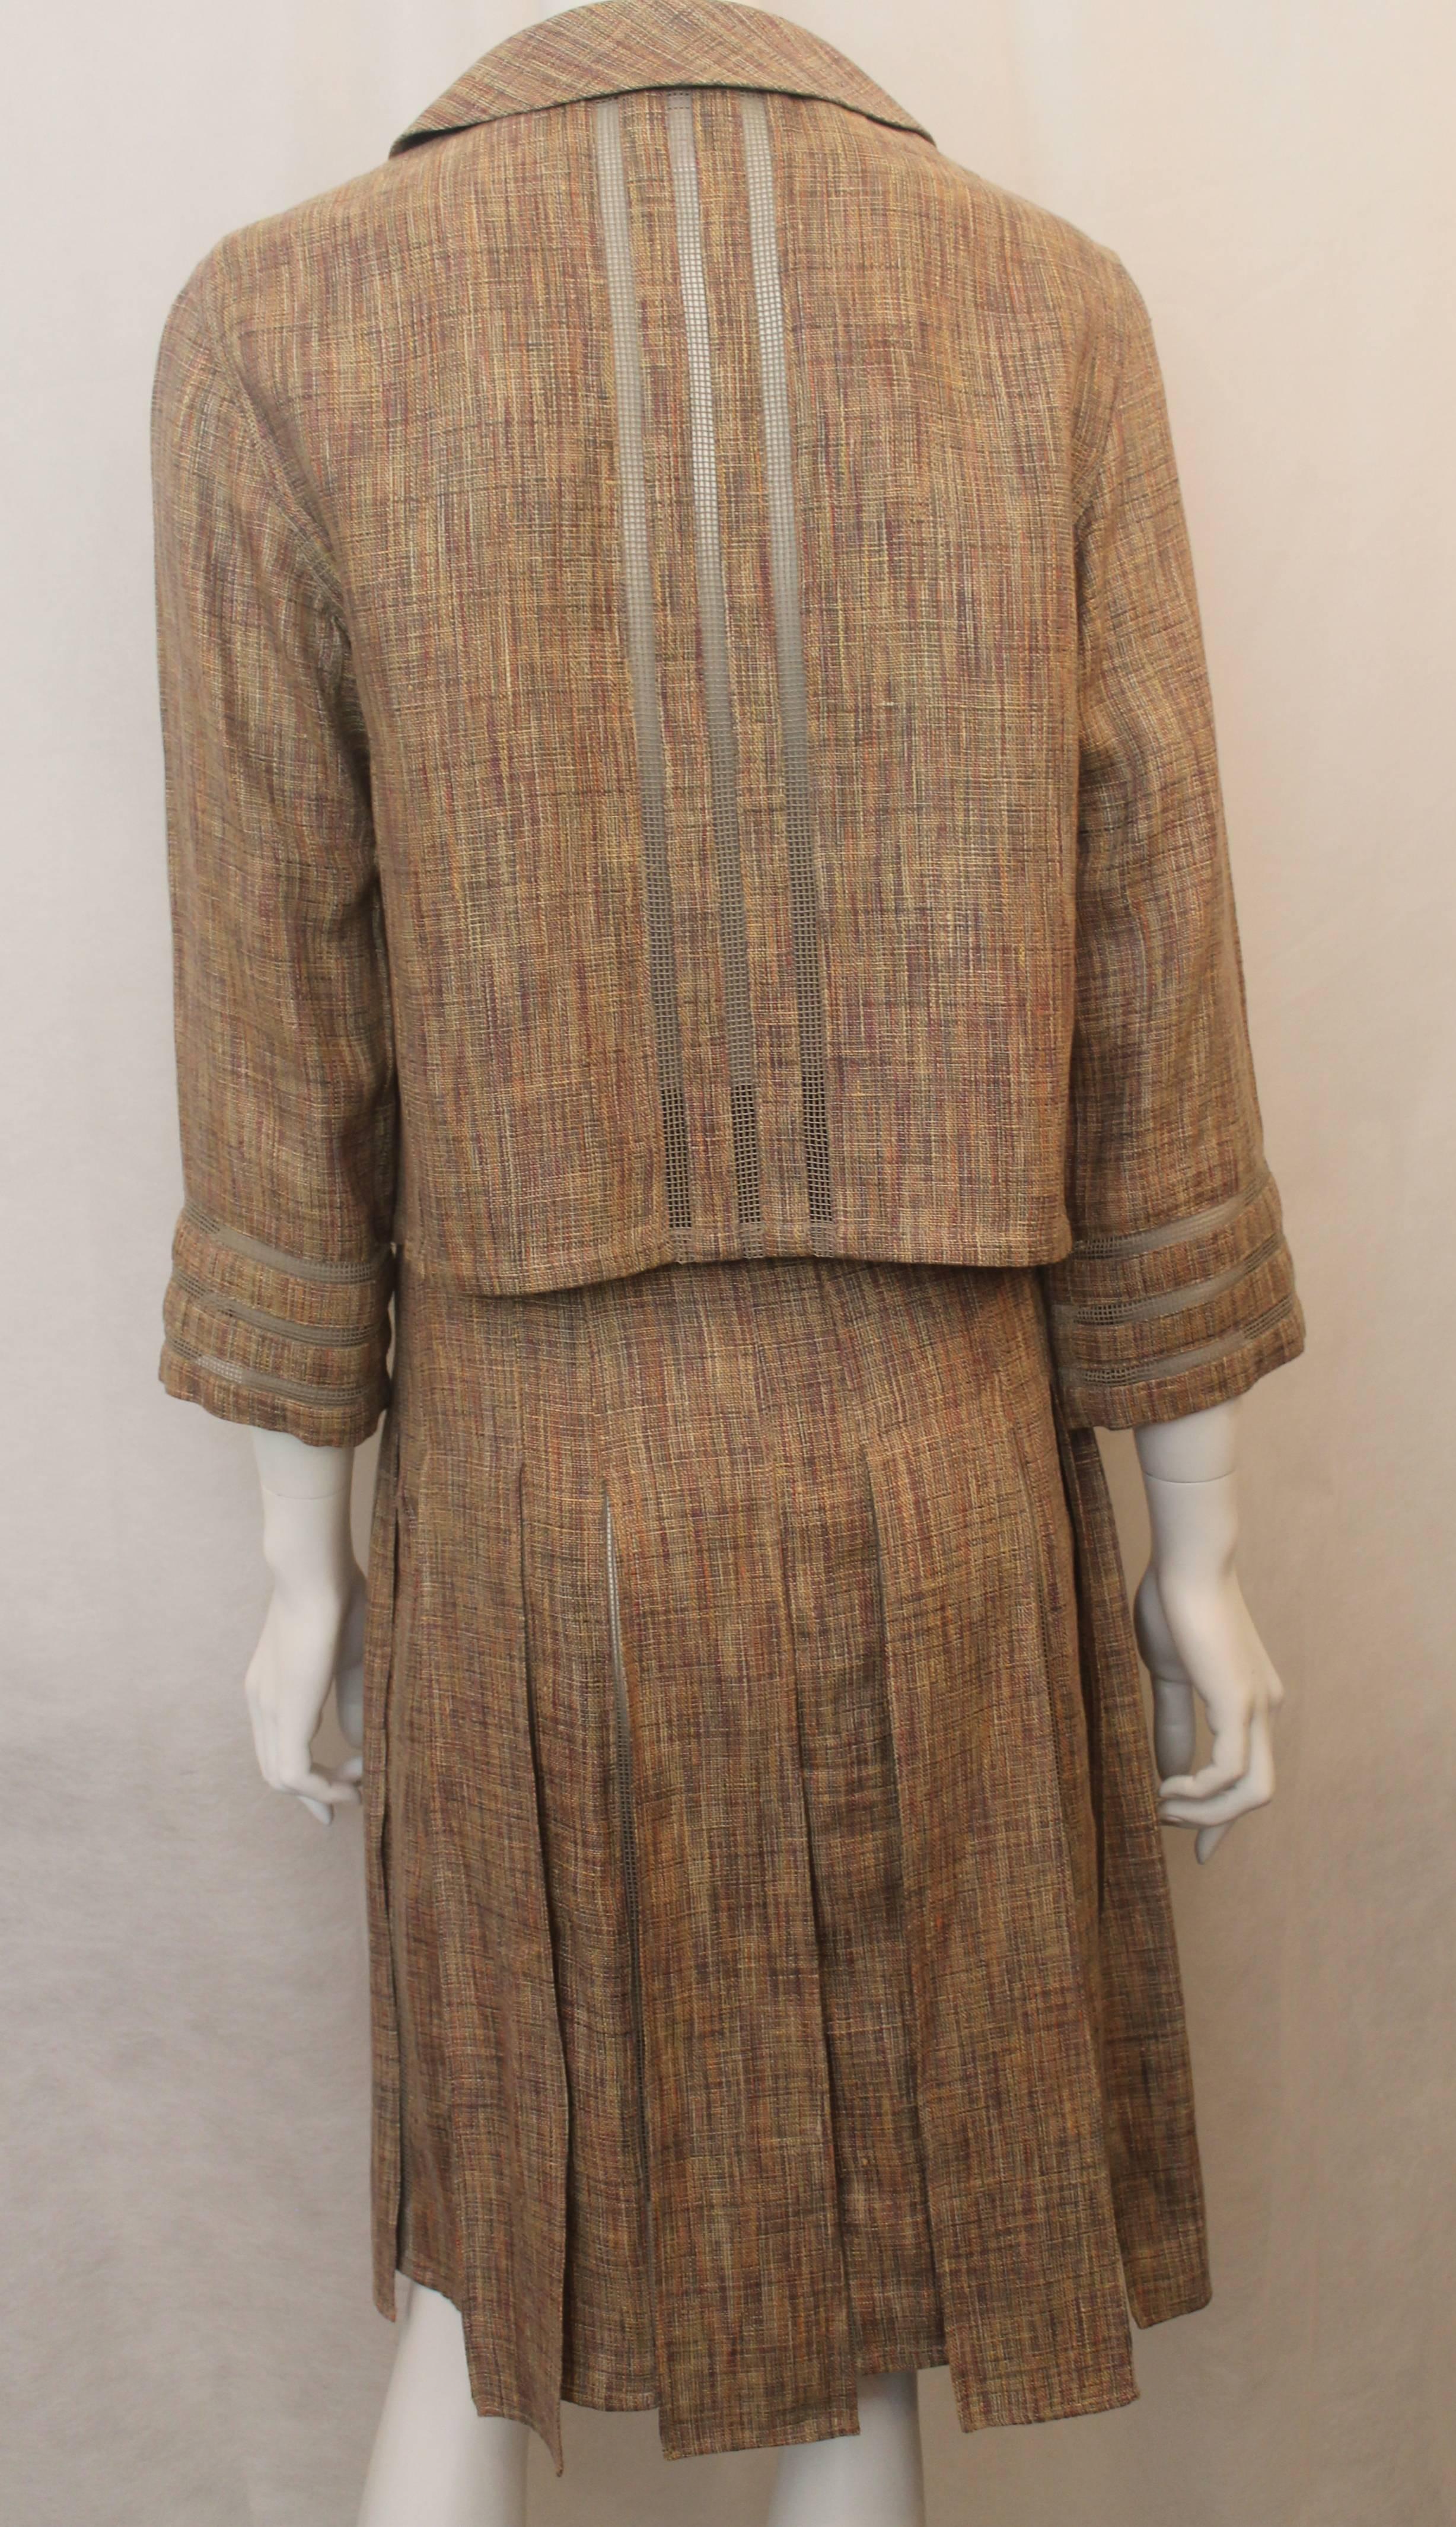 Chanel Earthtone Linen Blend Skirt Suit with Mesh Detail - 38 - 99P In Excellent Condition For Sale In West Palm Beach, FL